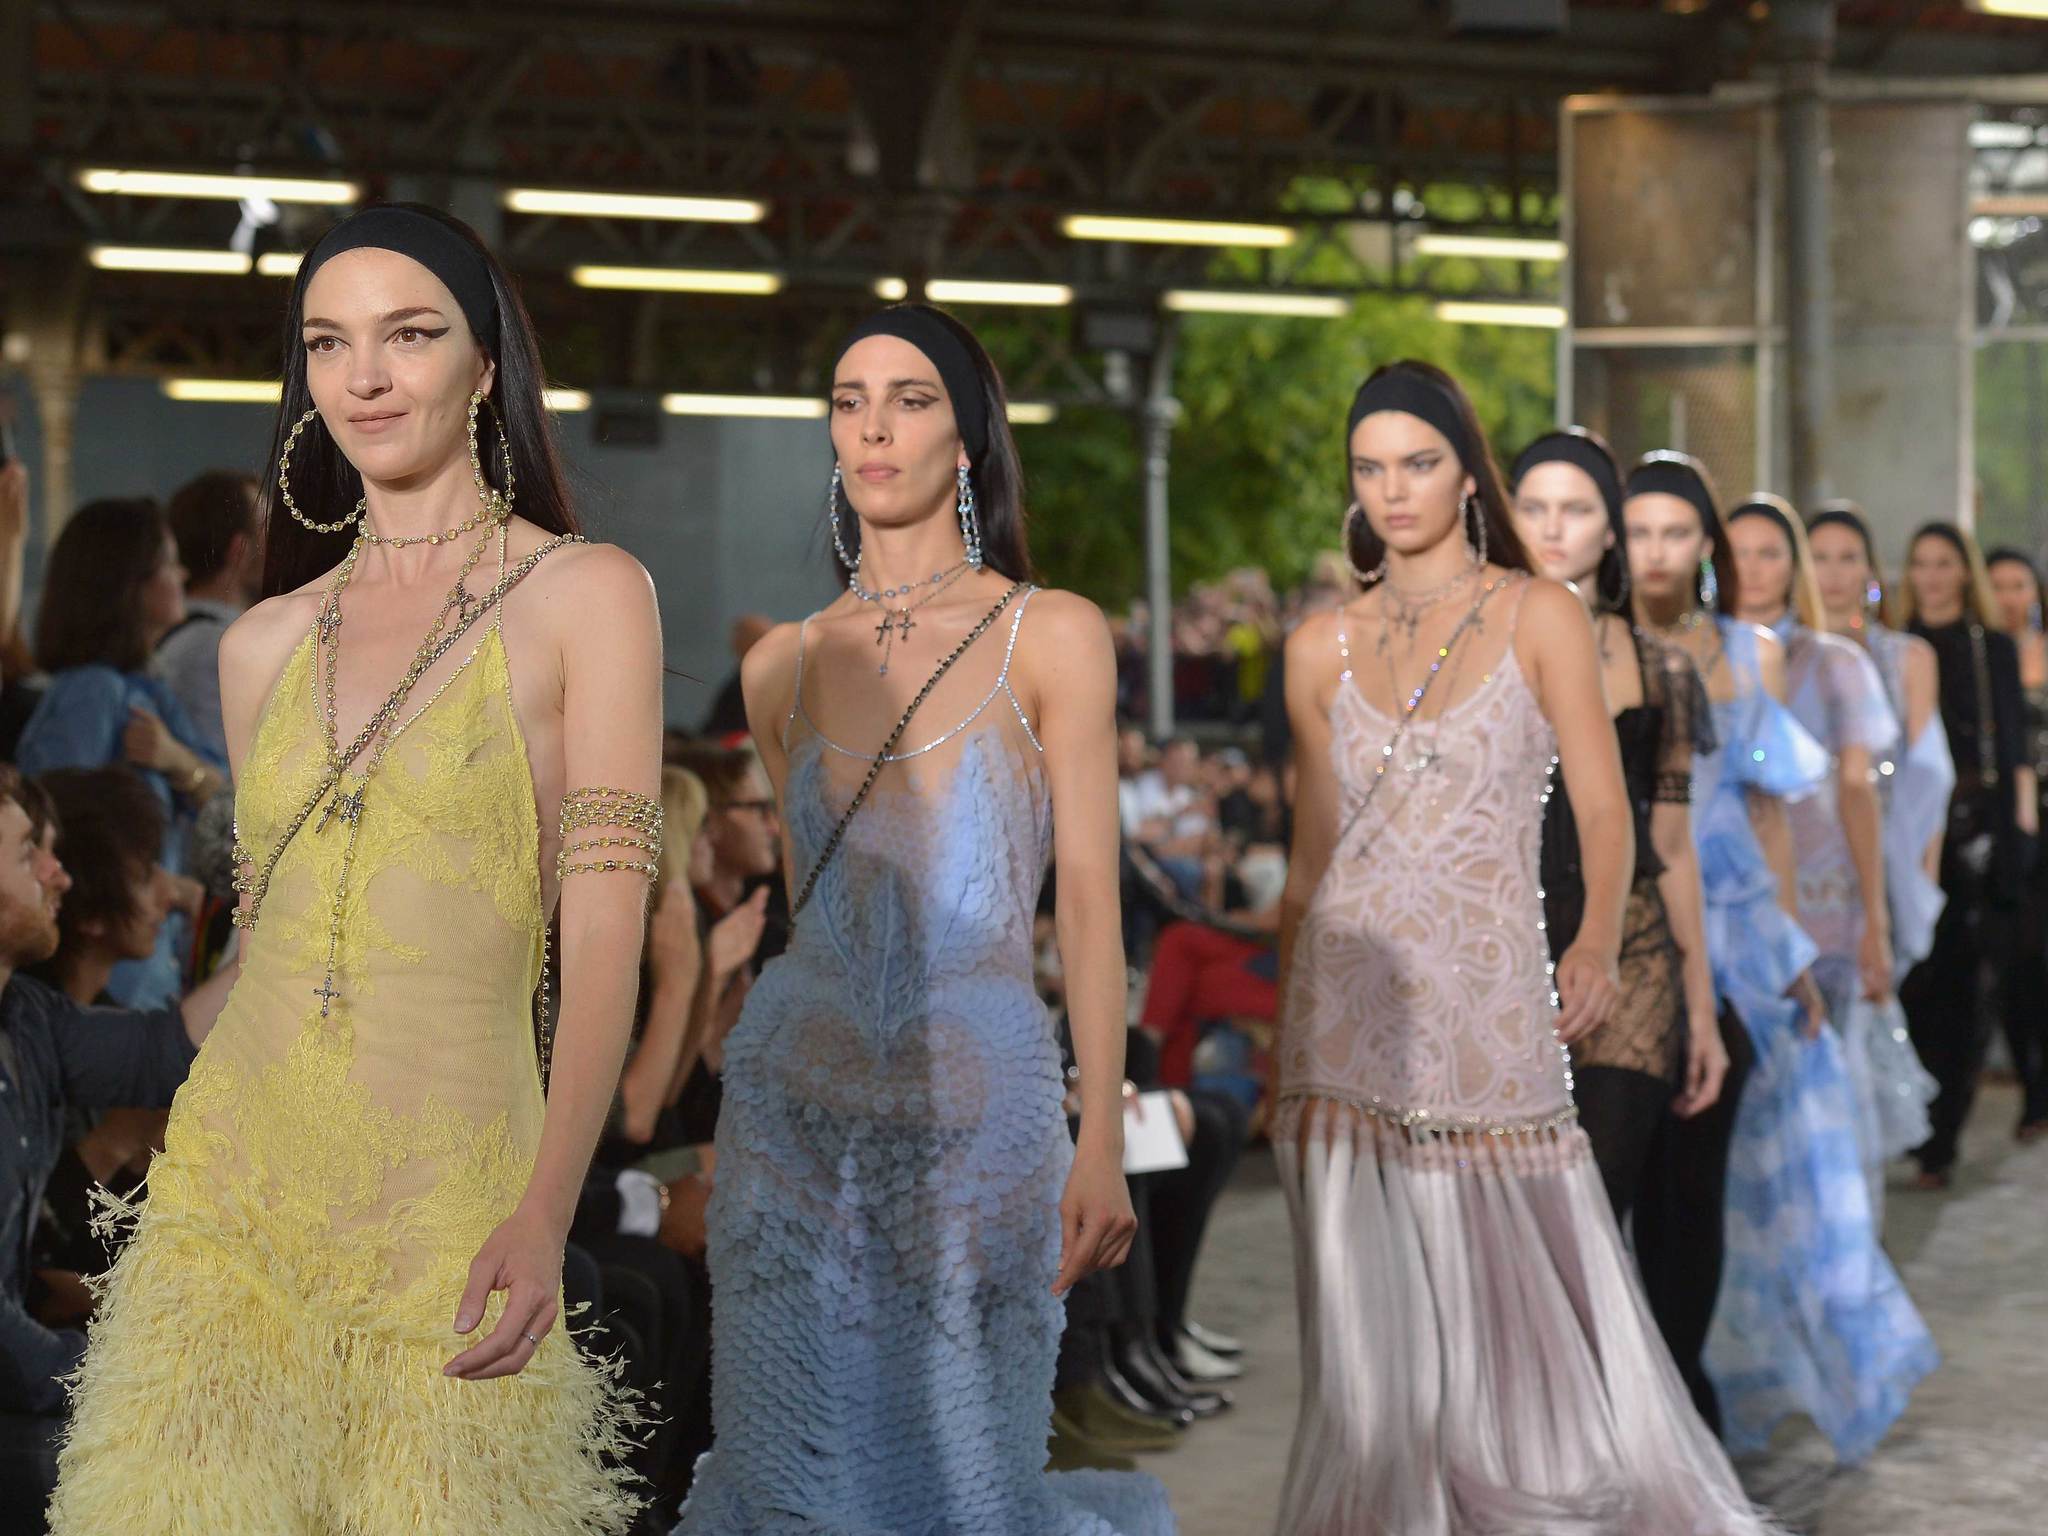 Givenchy to relocate spring/summer 2016 show to New York | The ...